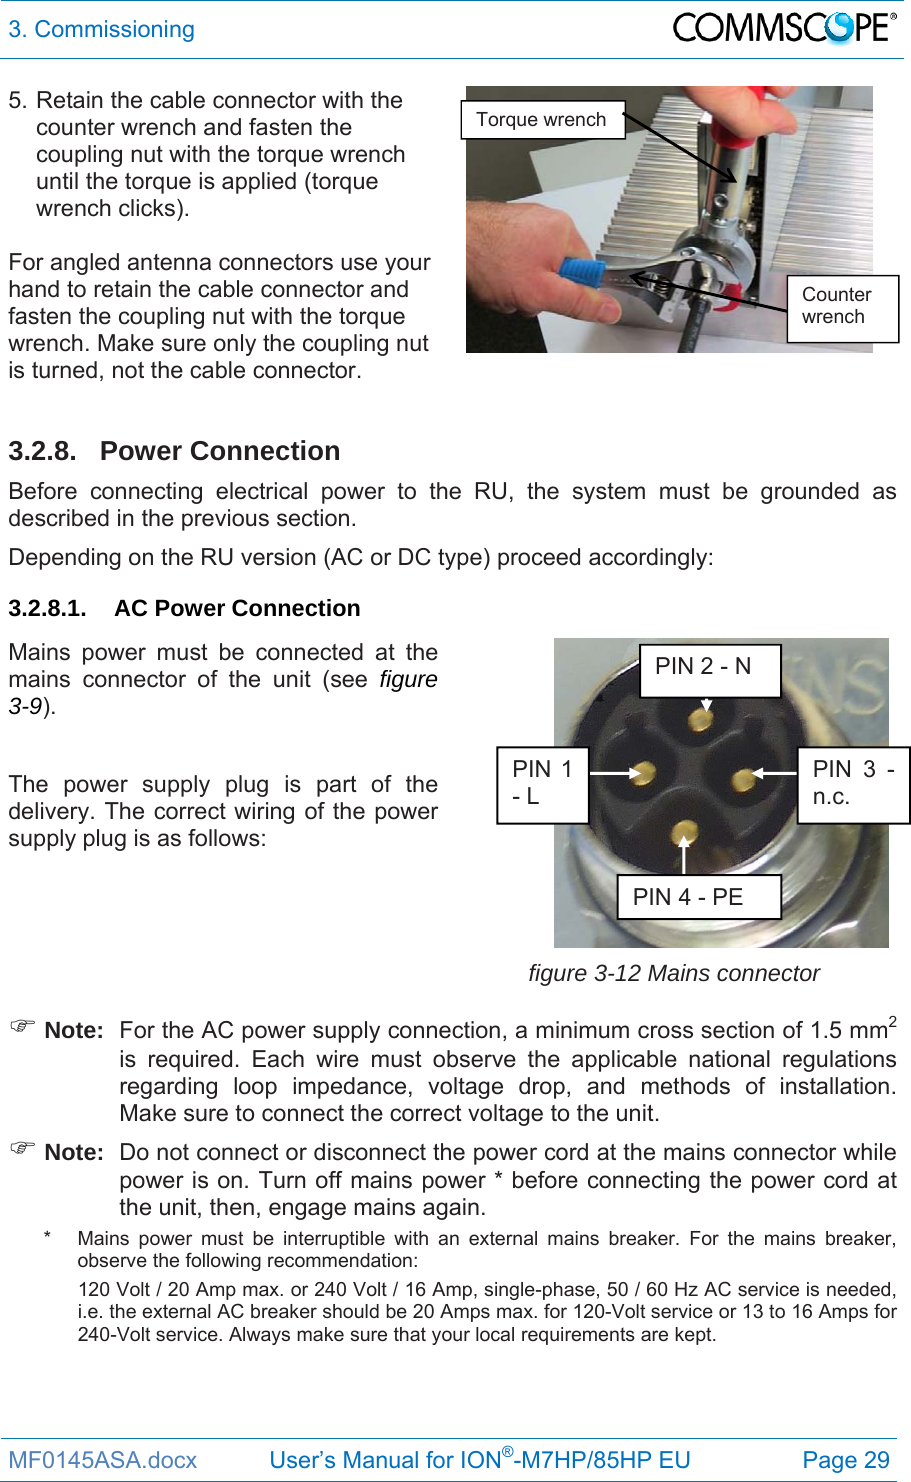 3. Commissioning  MF0145ASA.docx           User’s Manual for ION®-M7HP/85HP EU  Page 29 5. Retain the cable connector with the counter wrench and fasten the coupling nut with the torque wrench until the torque is applied (torque wrench clicks).  For angled antenna connectors use your hand to retain the cable connector and fasten the coupling nut with the torque wrench. Make sure only the coupling nut is turned, not the cable connector.    3.2.8. Power Connection Before connecting electrical power to the RU, the system must be grounded as described in the previous section.  Depending on the RU version (AC or DC type) proceed accordingly: 3.2.8.1. AC Power Connection Mains power must be connected at the mains connector of the unit (see figure 3-9).  The power supply plug is part of the delivery. The correct wiring of the power supply plug is as follows:   figure 3-12 Mains connector  Note:  For the AC power supply connection, a minimum cross section of 1.5 mm2 is required. Each wire must observe the applicable national regulations regarding loop impedance, voltage drop, and methods of installation. Make sure to connect the correct voltage to the unit.  Note:  Do not connect or disconnect the power cord at the mains connector while power is on. Turn off mains power * before connecting the power cord at the unit, then, engage mains again. *   Mains power must be interruptible with an external mains breaker. For the mains breaker, observe the following recommendation: 120 Volt / 20 Amp max. or 240 Volt / 16 Amp, single-phase, 50 / 60 Hz AC service is needed, i.e. the external AC breaker should be 20 Amps max. for 120-Volt service or 13 to 16 Amps for 240-Volt service. Always make sure that your local requirements are kept.    PIN 3 - n.c. PIN 4 - PE PIN 1 - L PIN 2 - N Torque wrench Counter wrench 